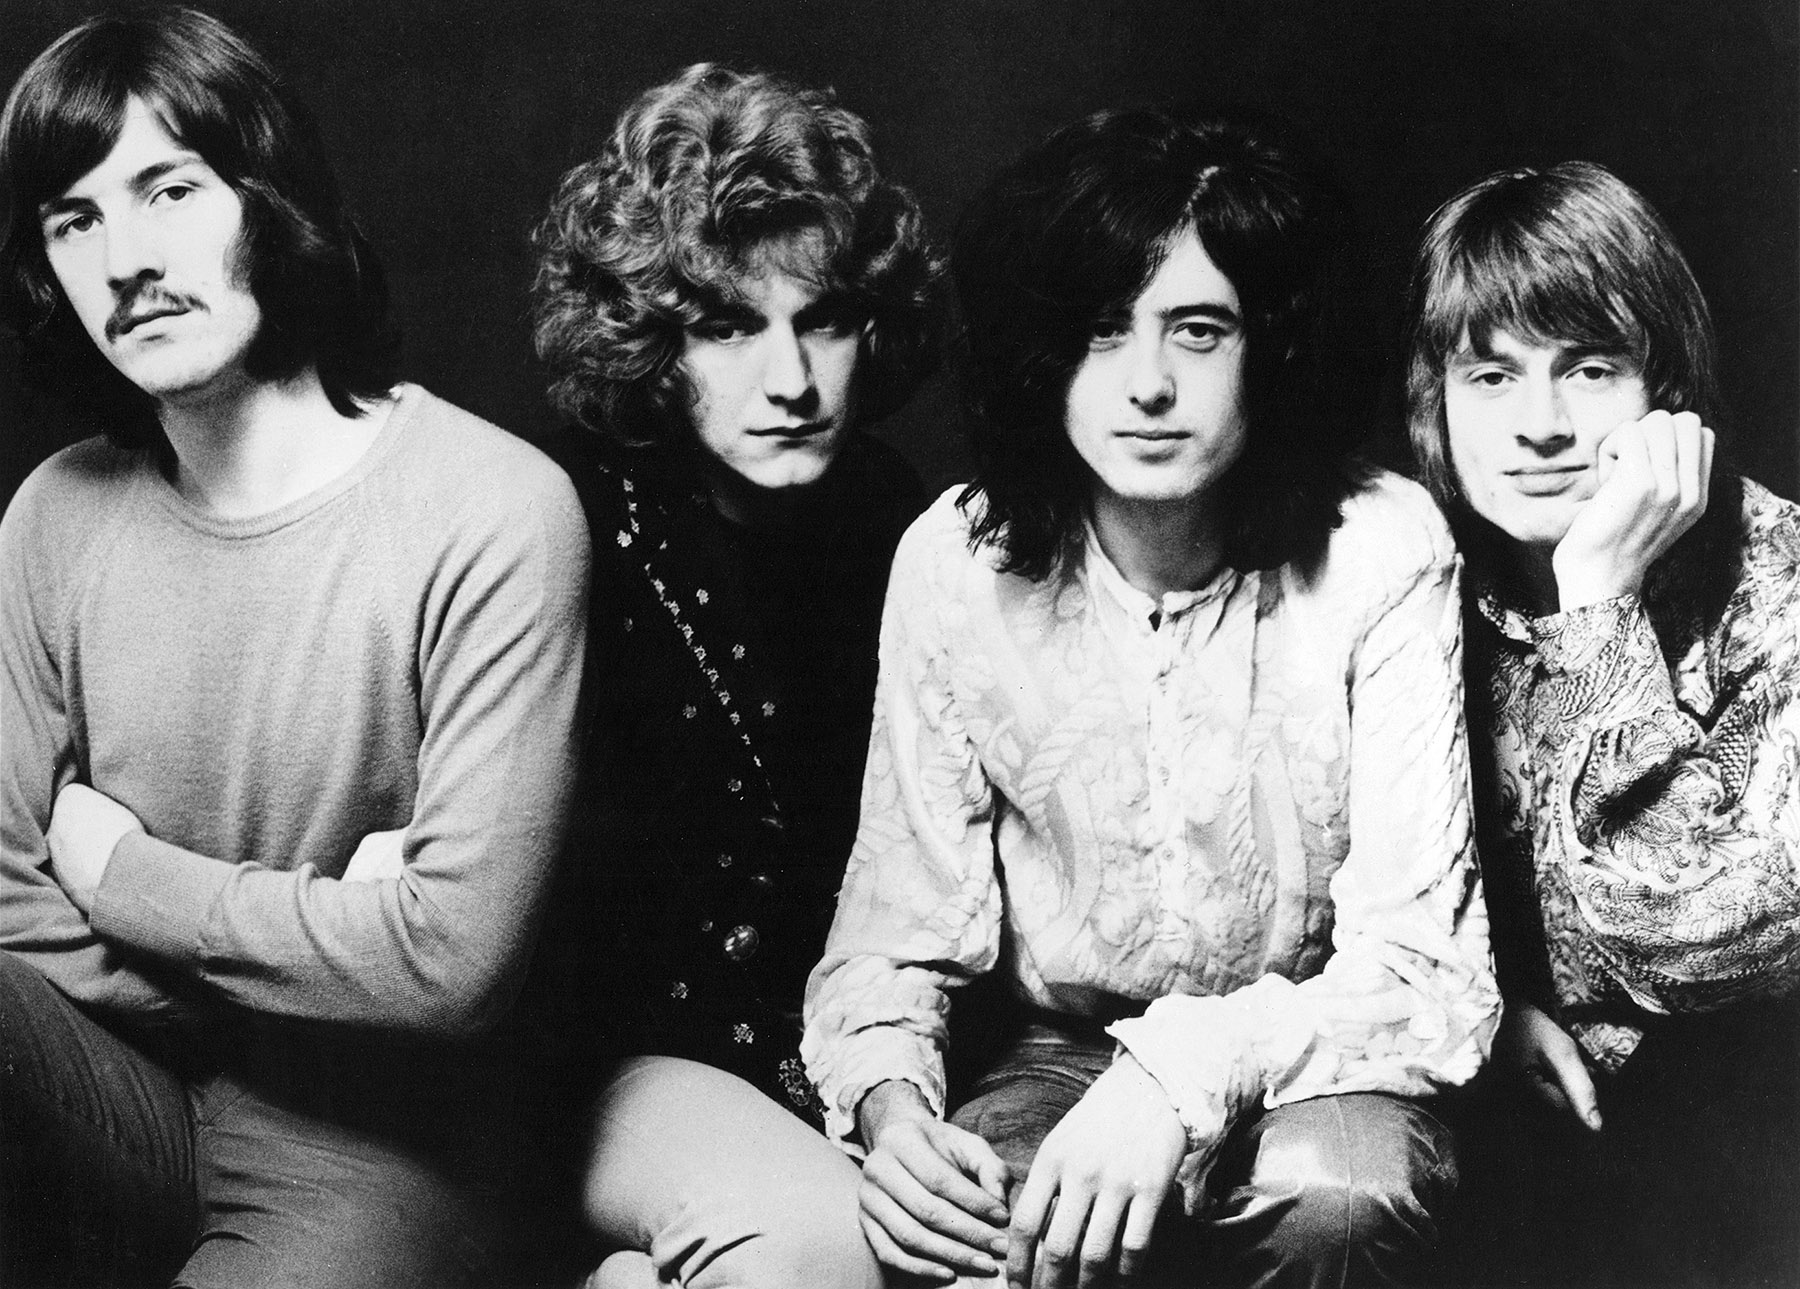 Led Zeppelin | Official Website , II, III, IV, Houses of the Holy and Physical Graffiti | Zeppelin - Official Website